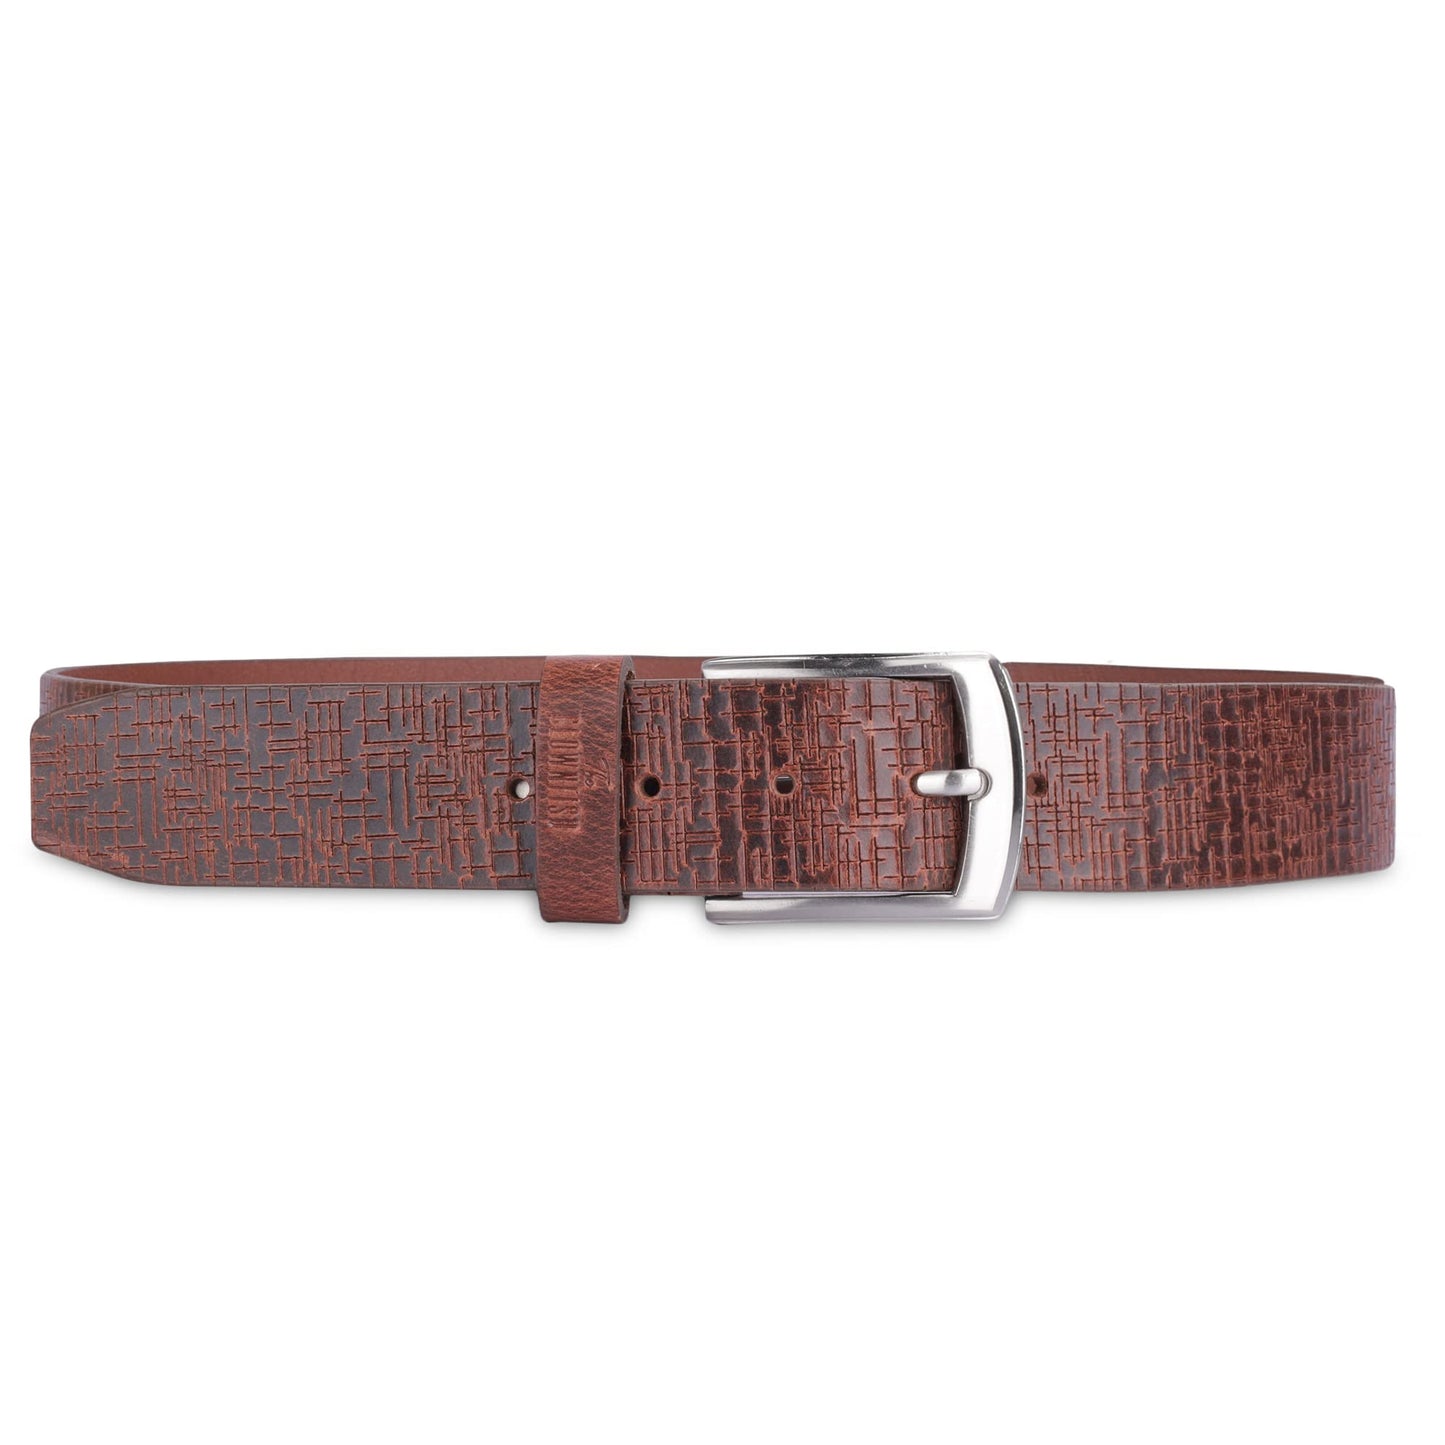 THE CLOWNFISH Men's Genuine Leather Belt with Textured Design- Tan (Size-36 inches)